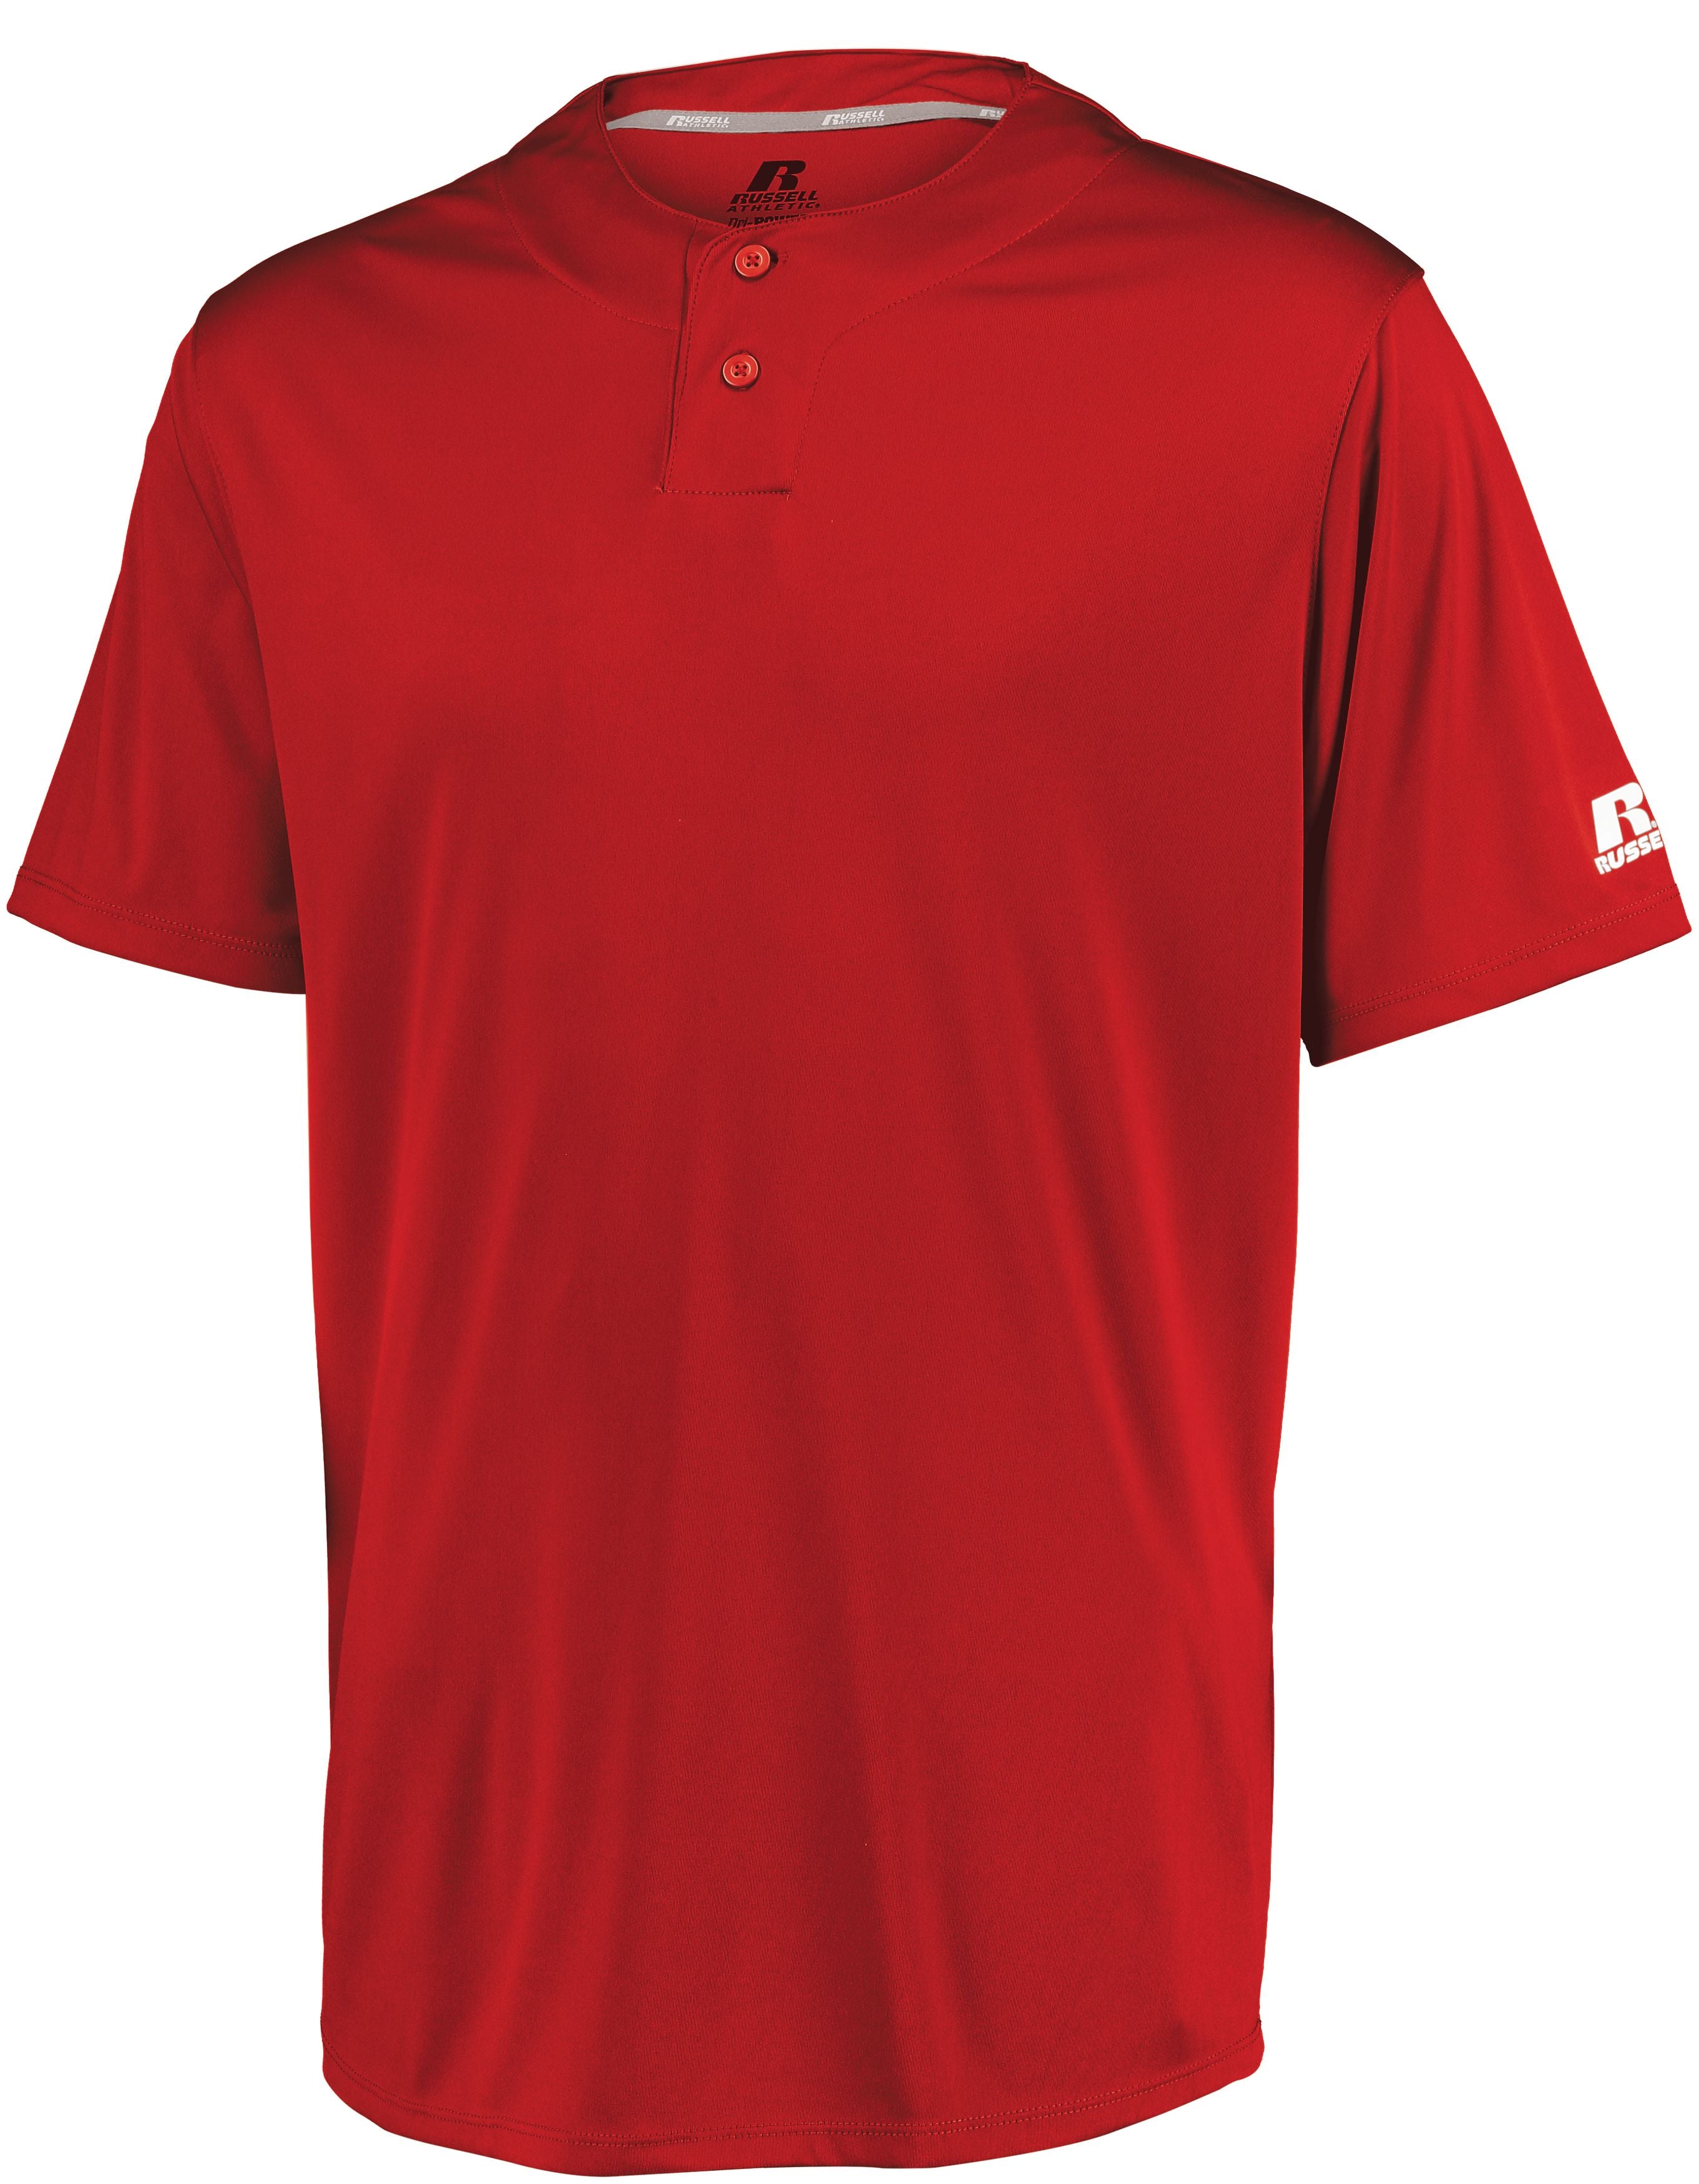 Russell Athletic Youth Performance Two-Button Solid Jersey in True Red  -Part of the Youth, Youth-Jersey, Baseball, Russell-Athletic-Products, Shirts, All-Sports, All-Sports-1 product lines at KanaleyCreations.com